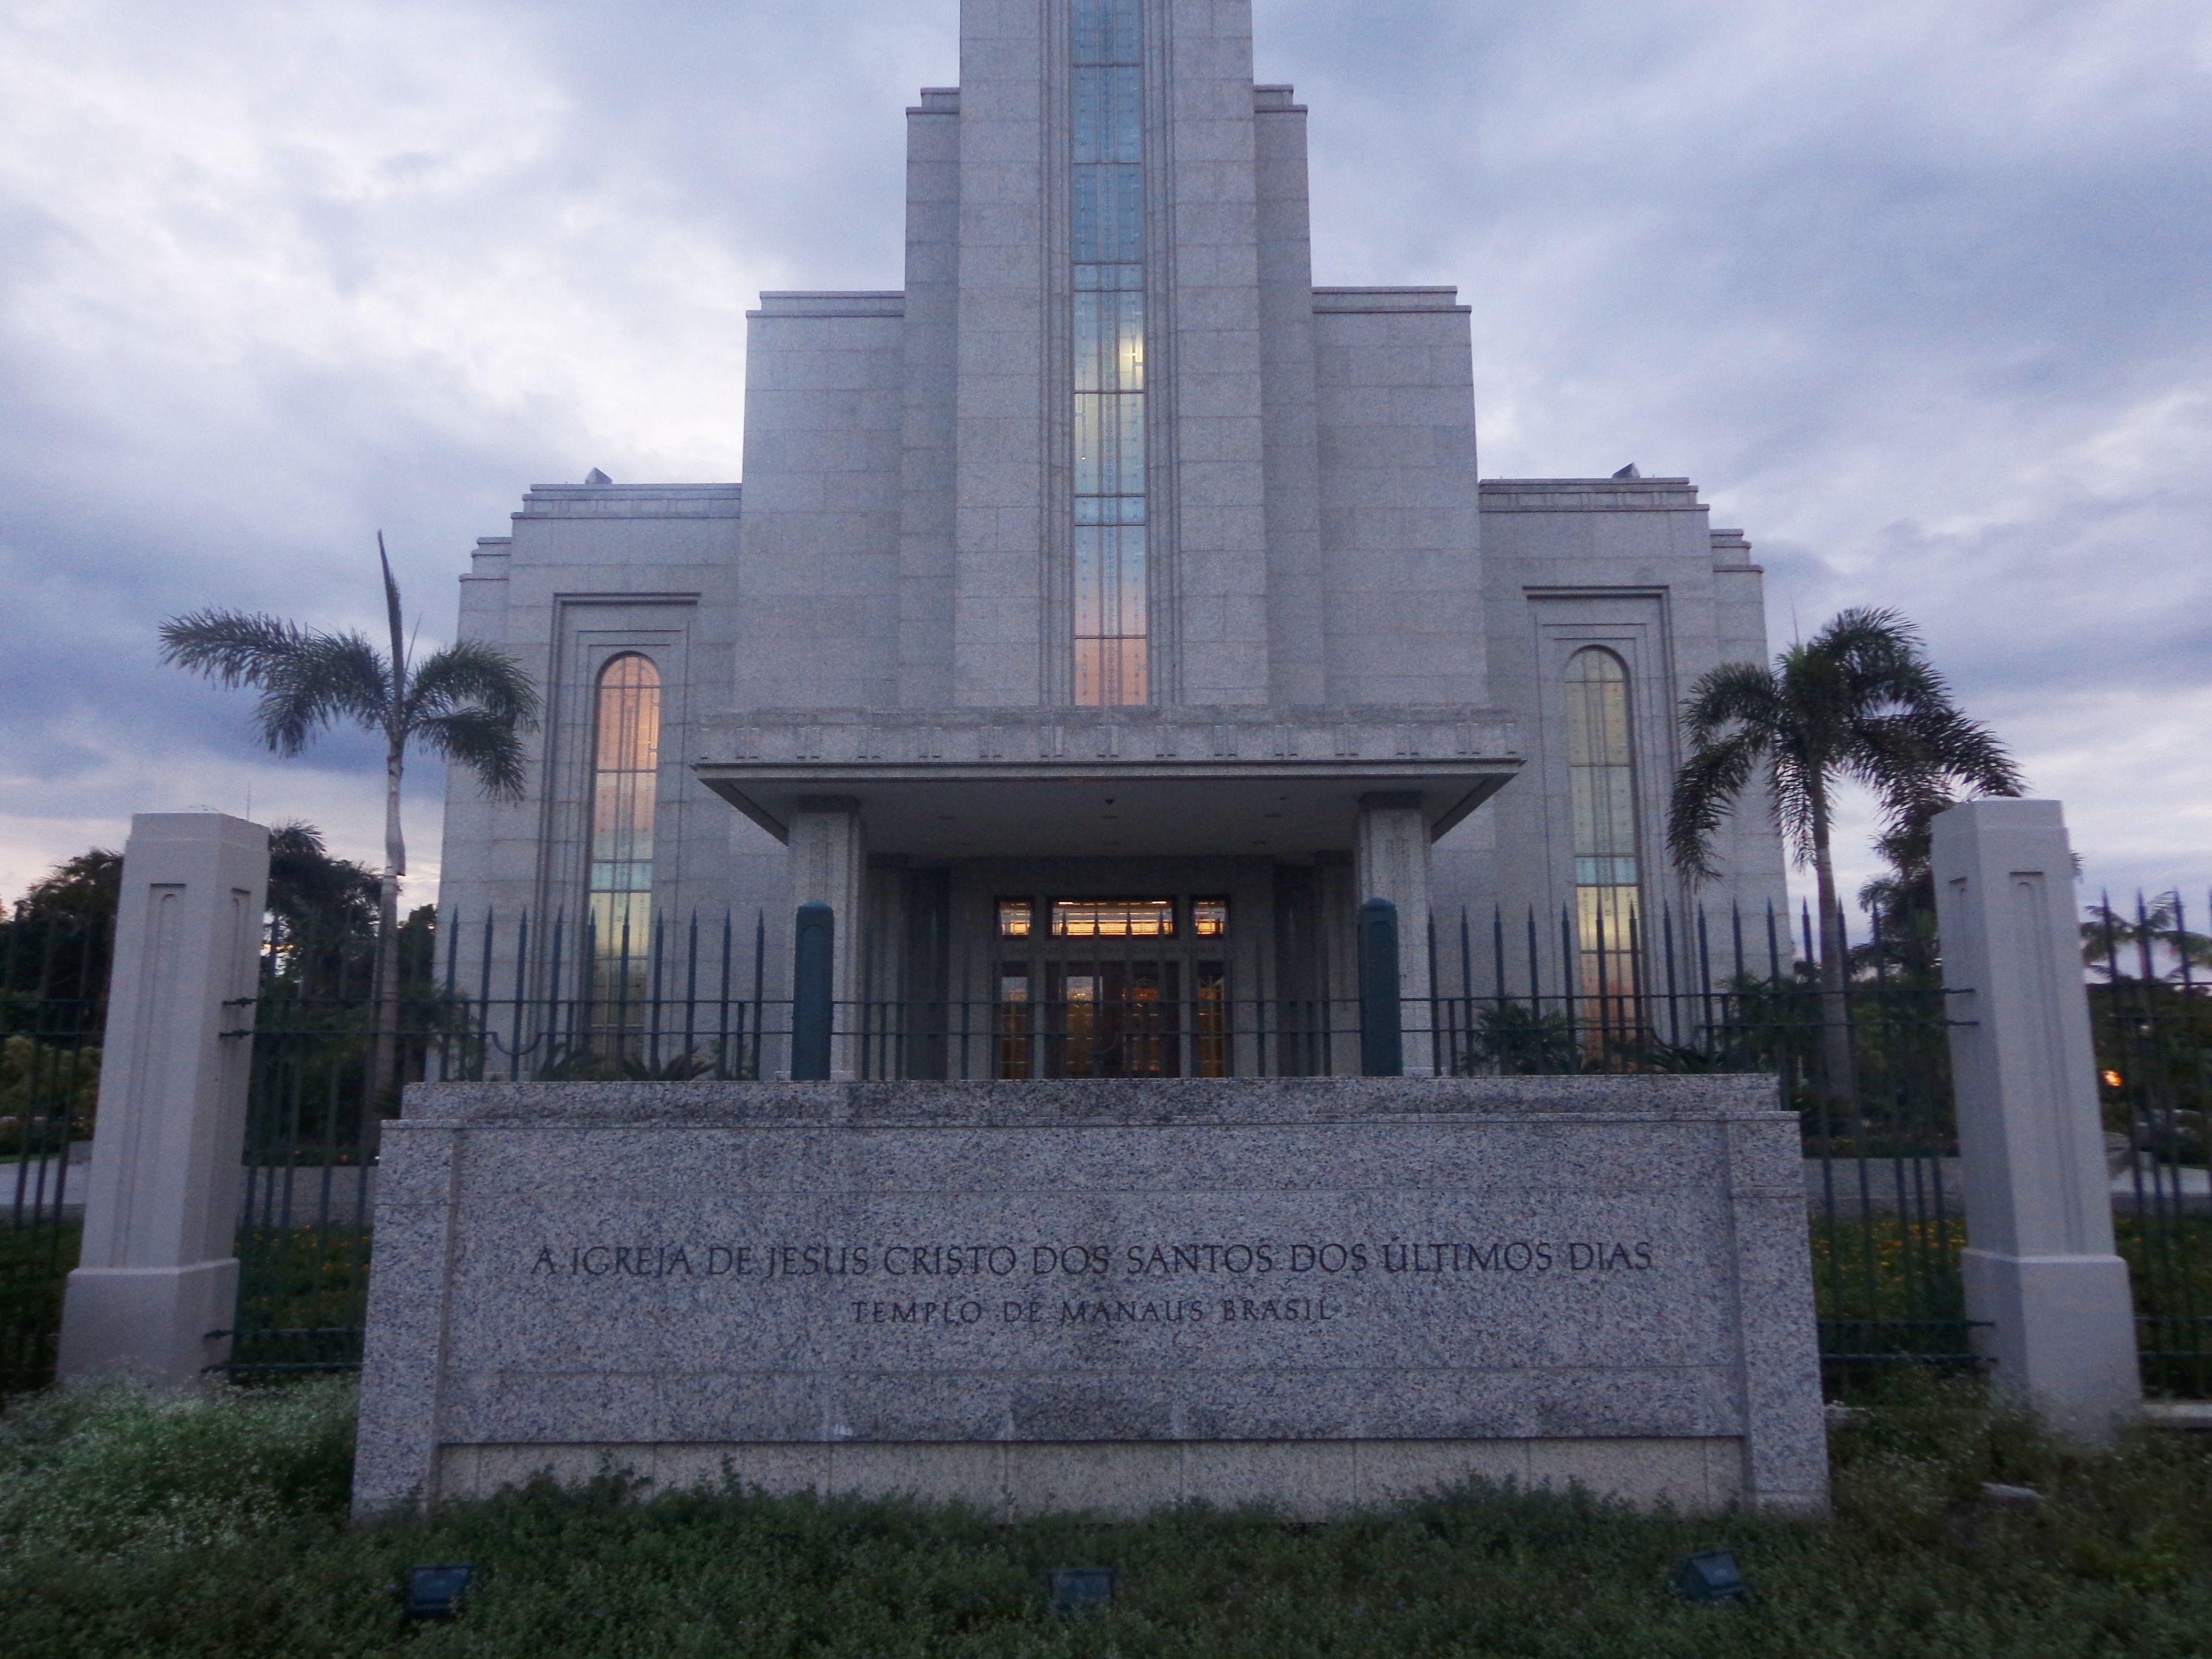 The Manaus Brazil Temple name sign, including the entrance and exterior of the temple.